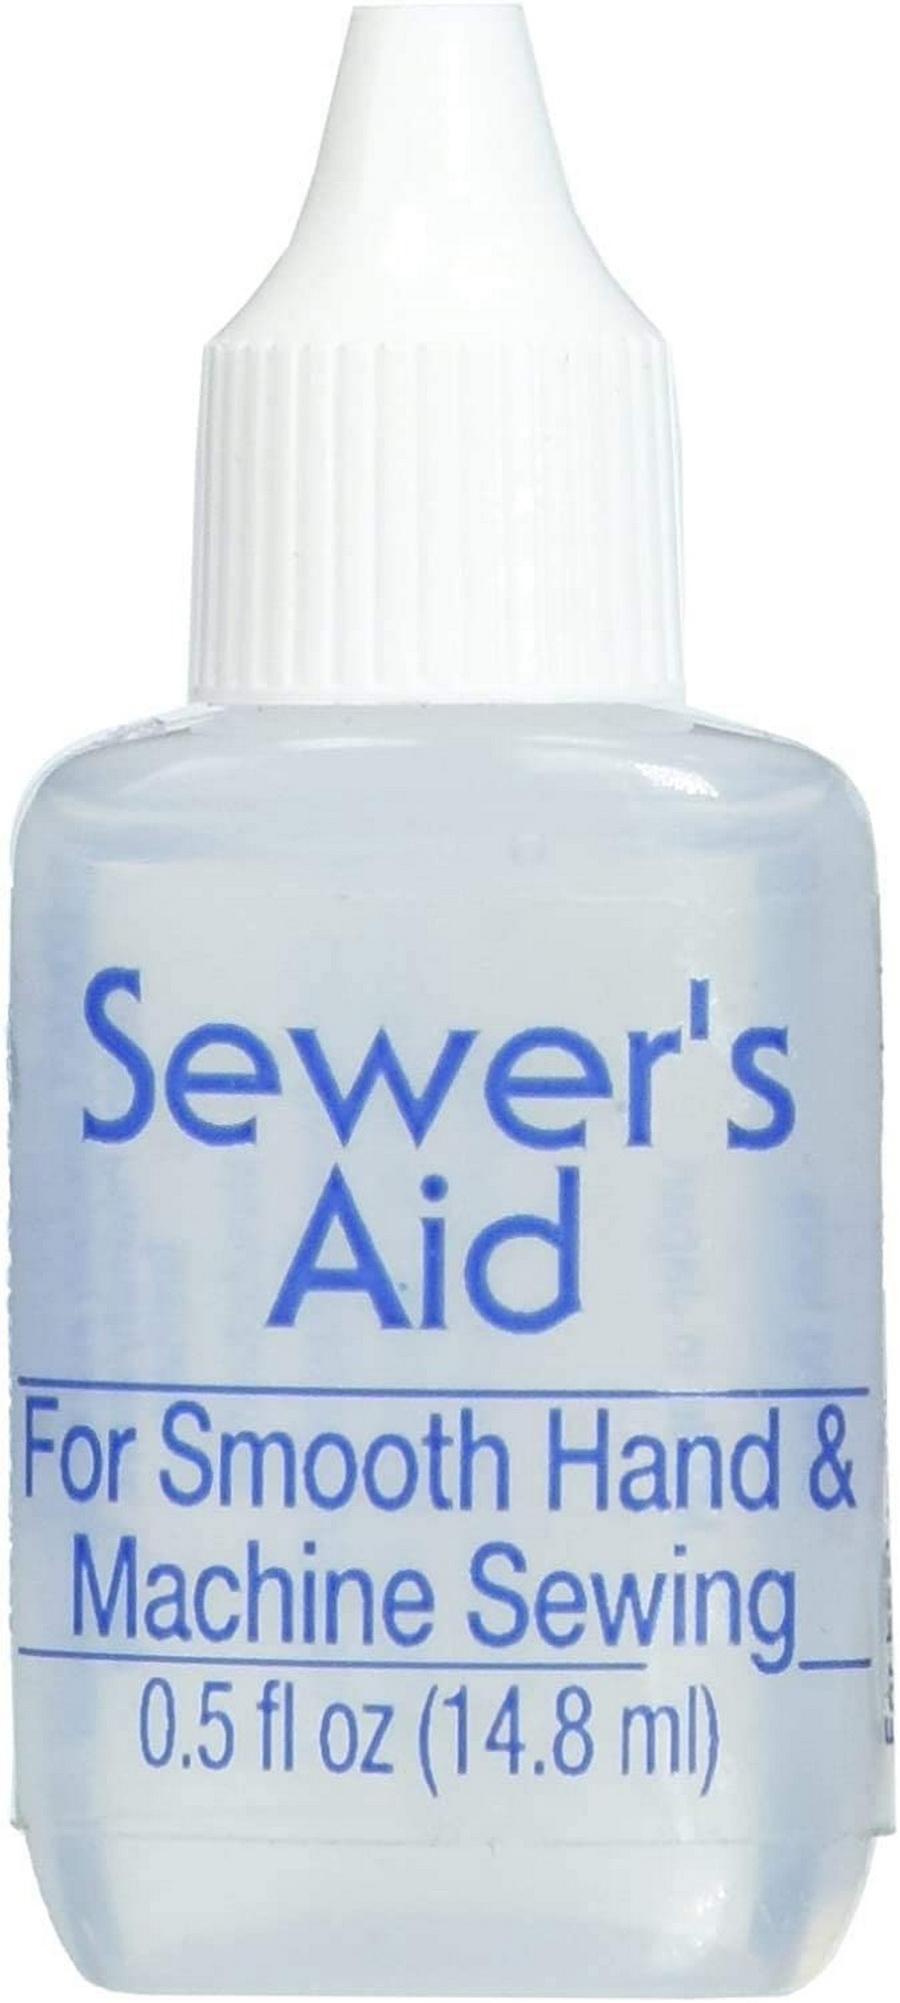 Dritz Sewer's Aid